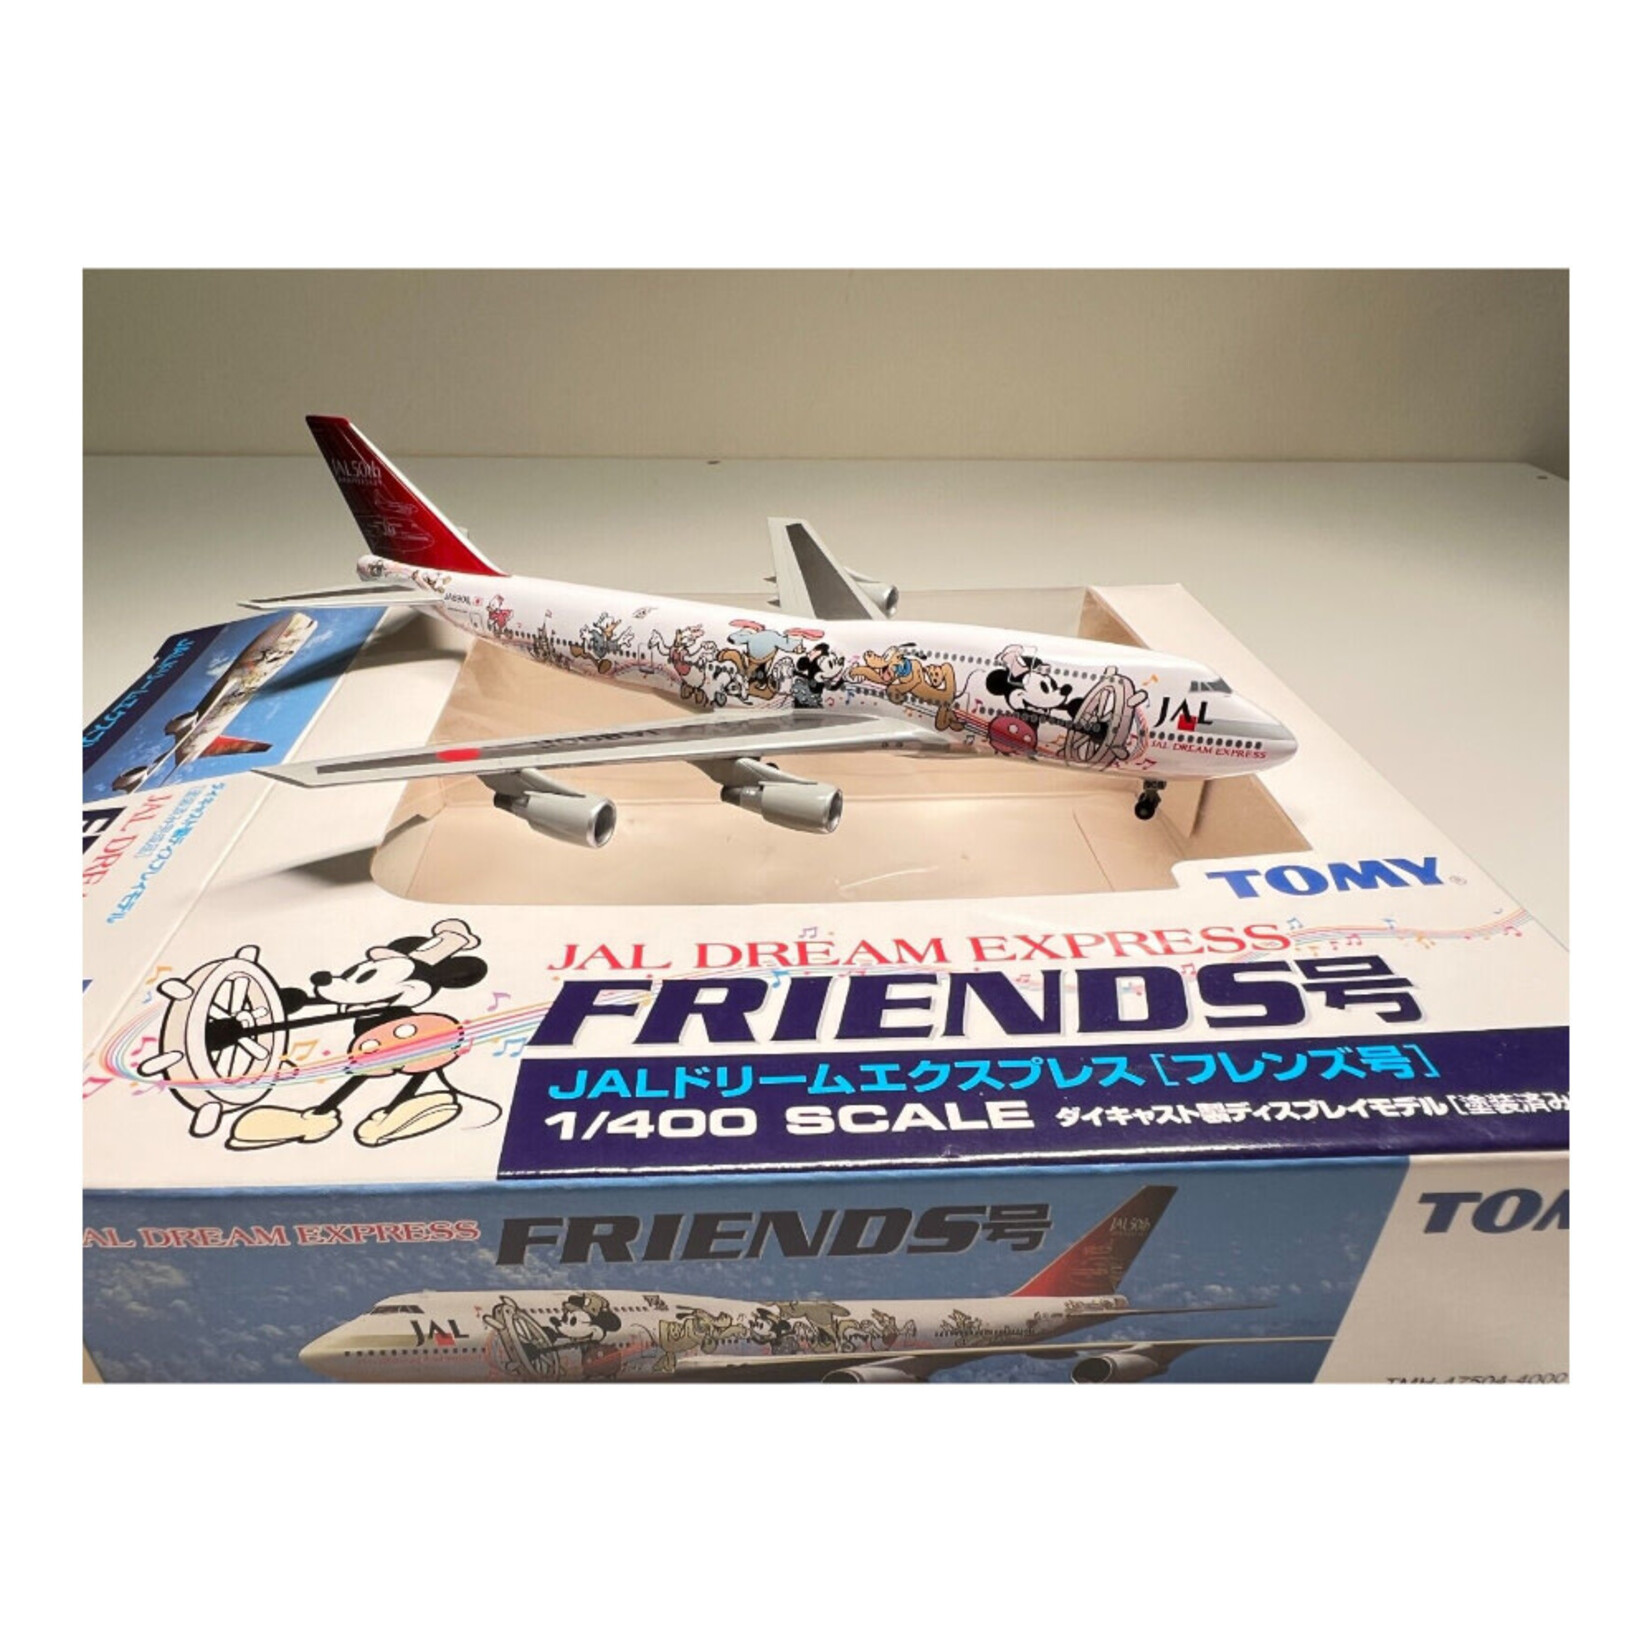 Tomy TOMY 1/400 JAL DREAM EXPRESS FRIENDS